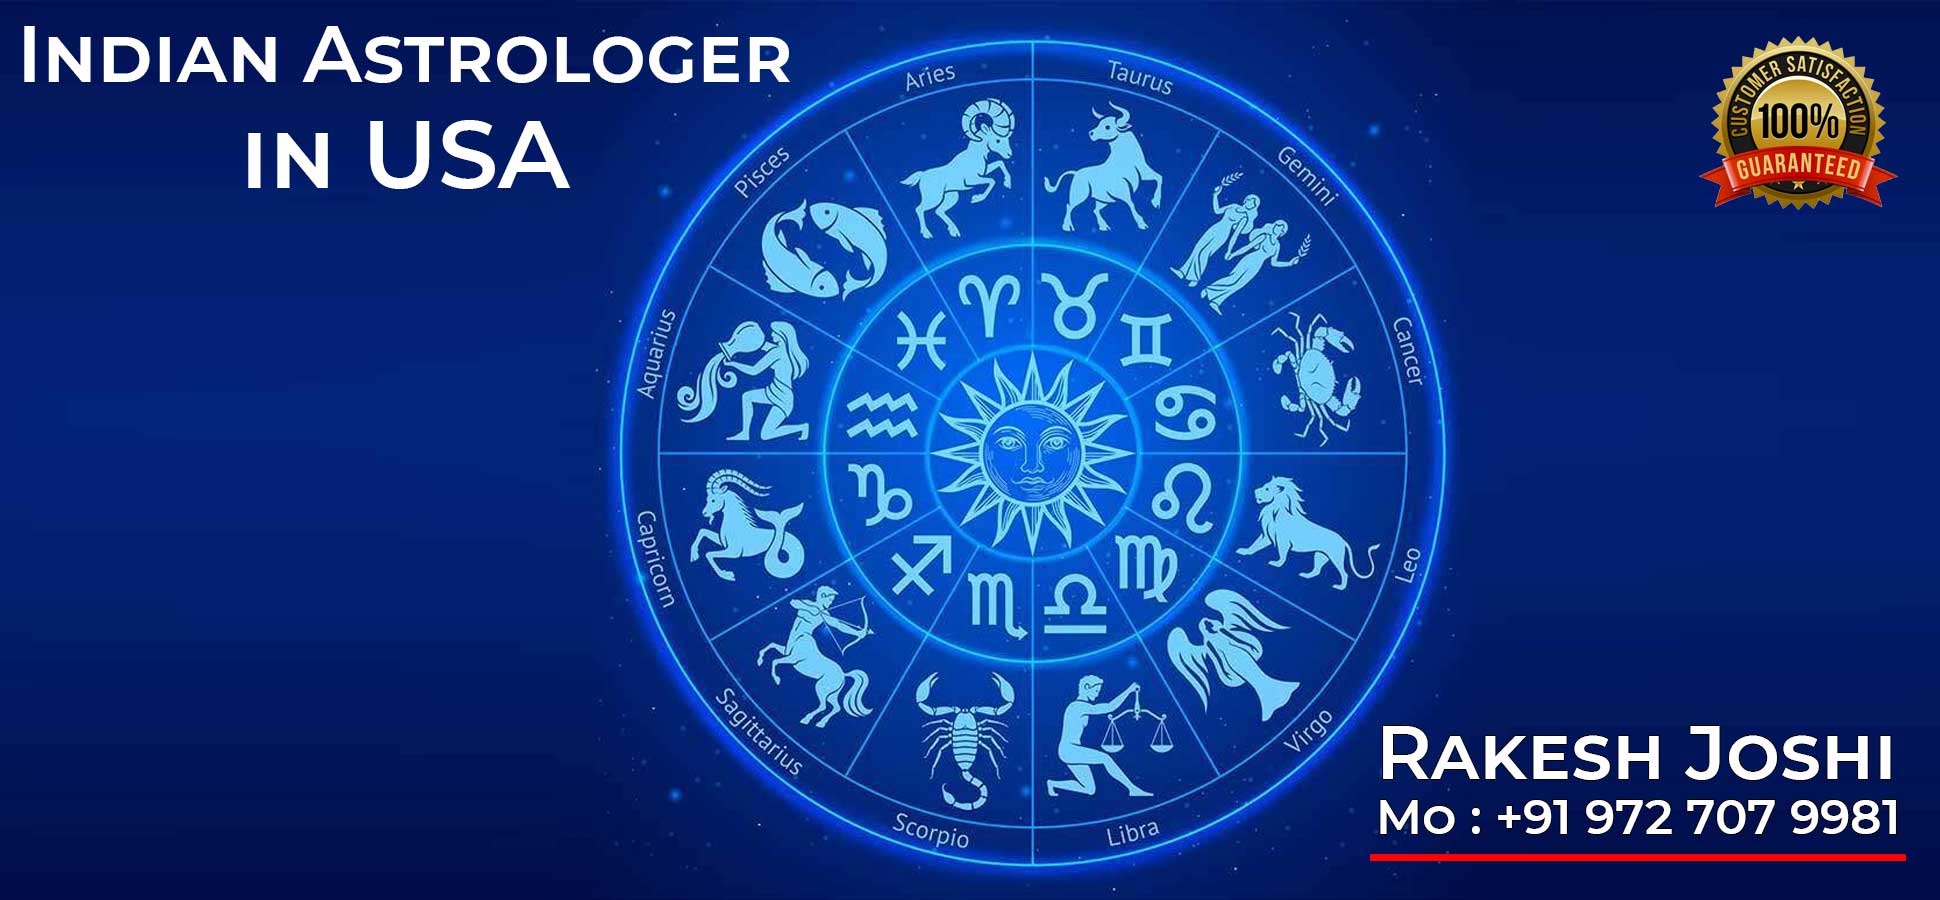 Indian Astrologer in USA